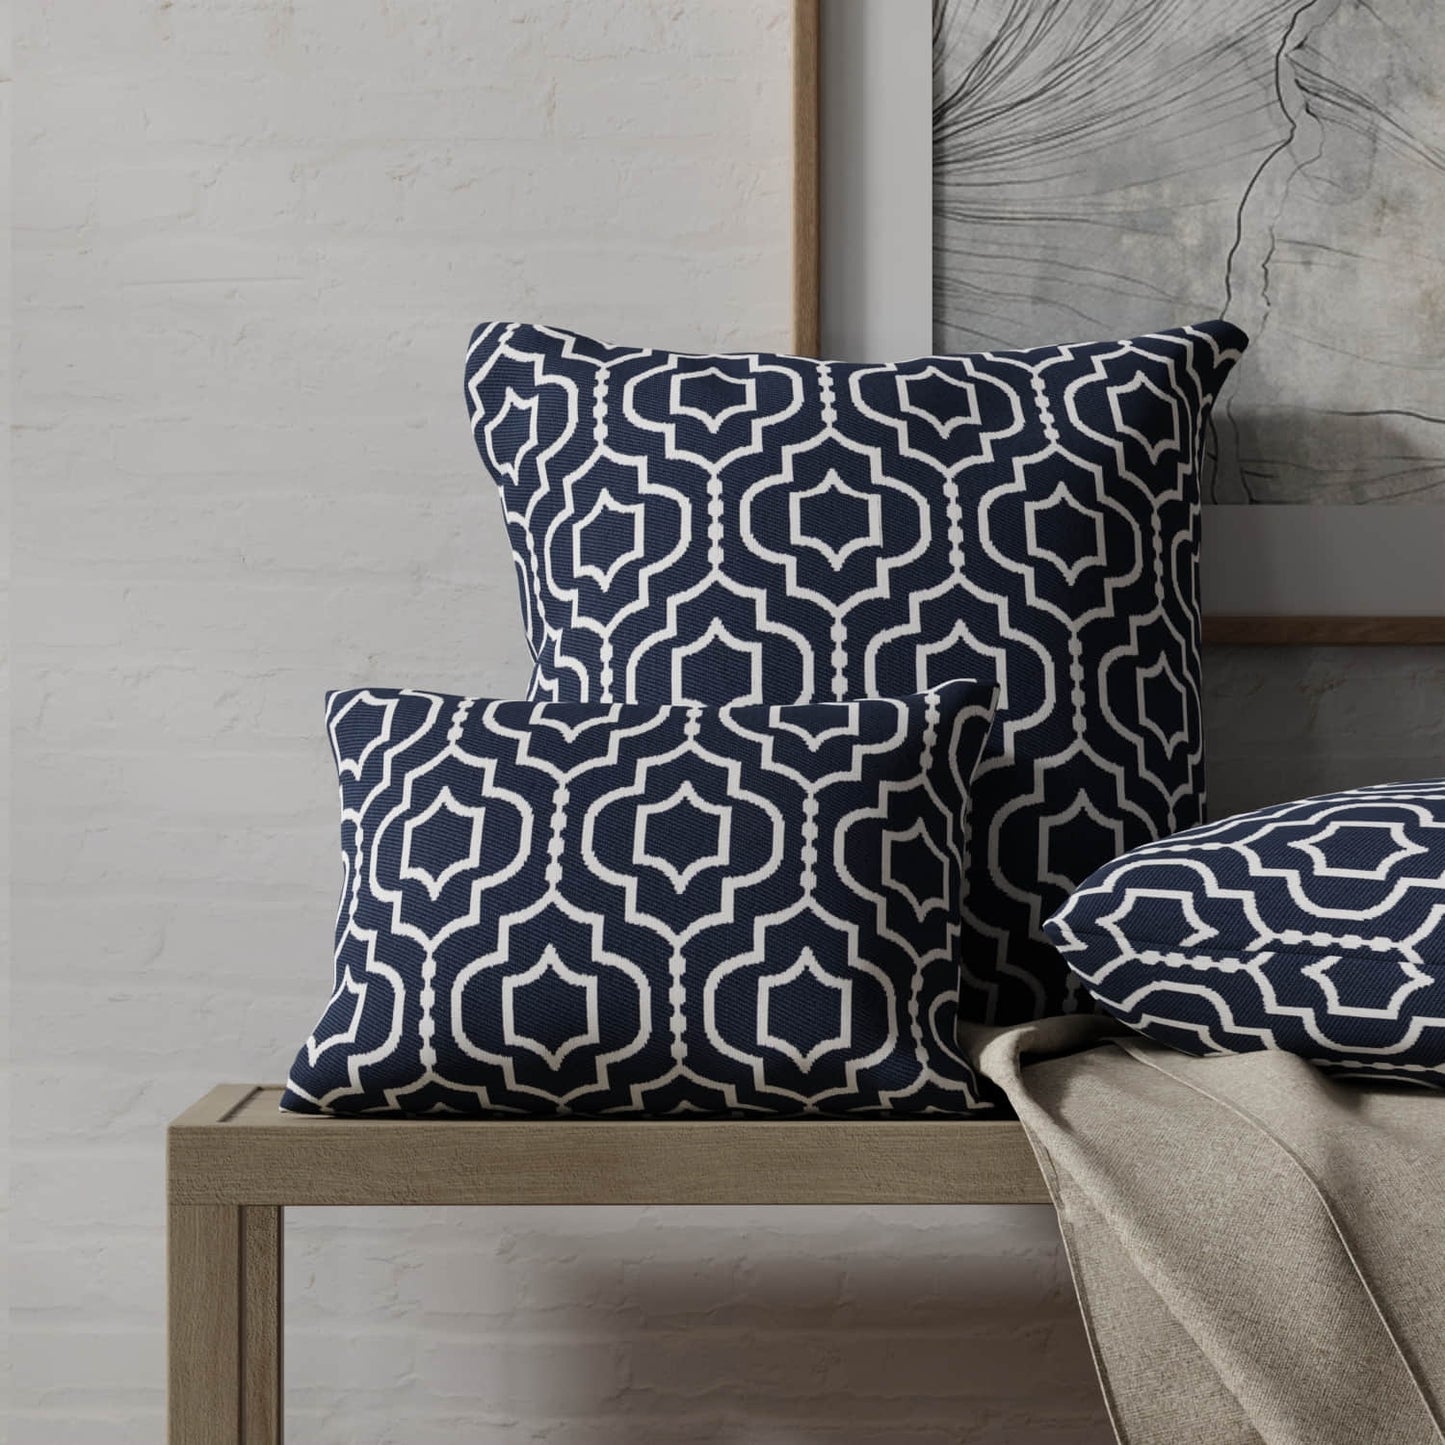 Corwin Navy made up on pillows